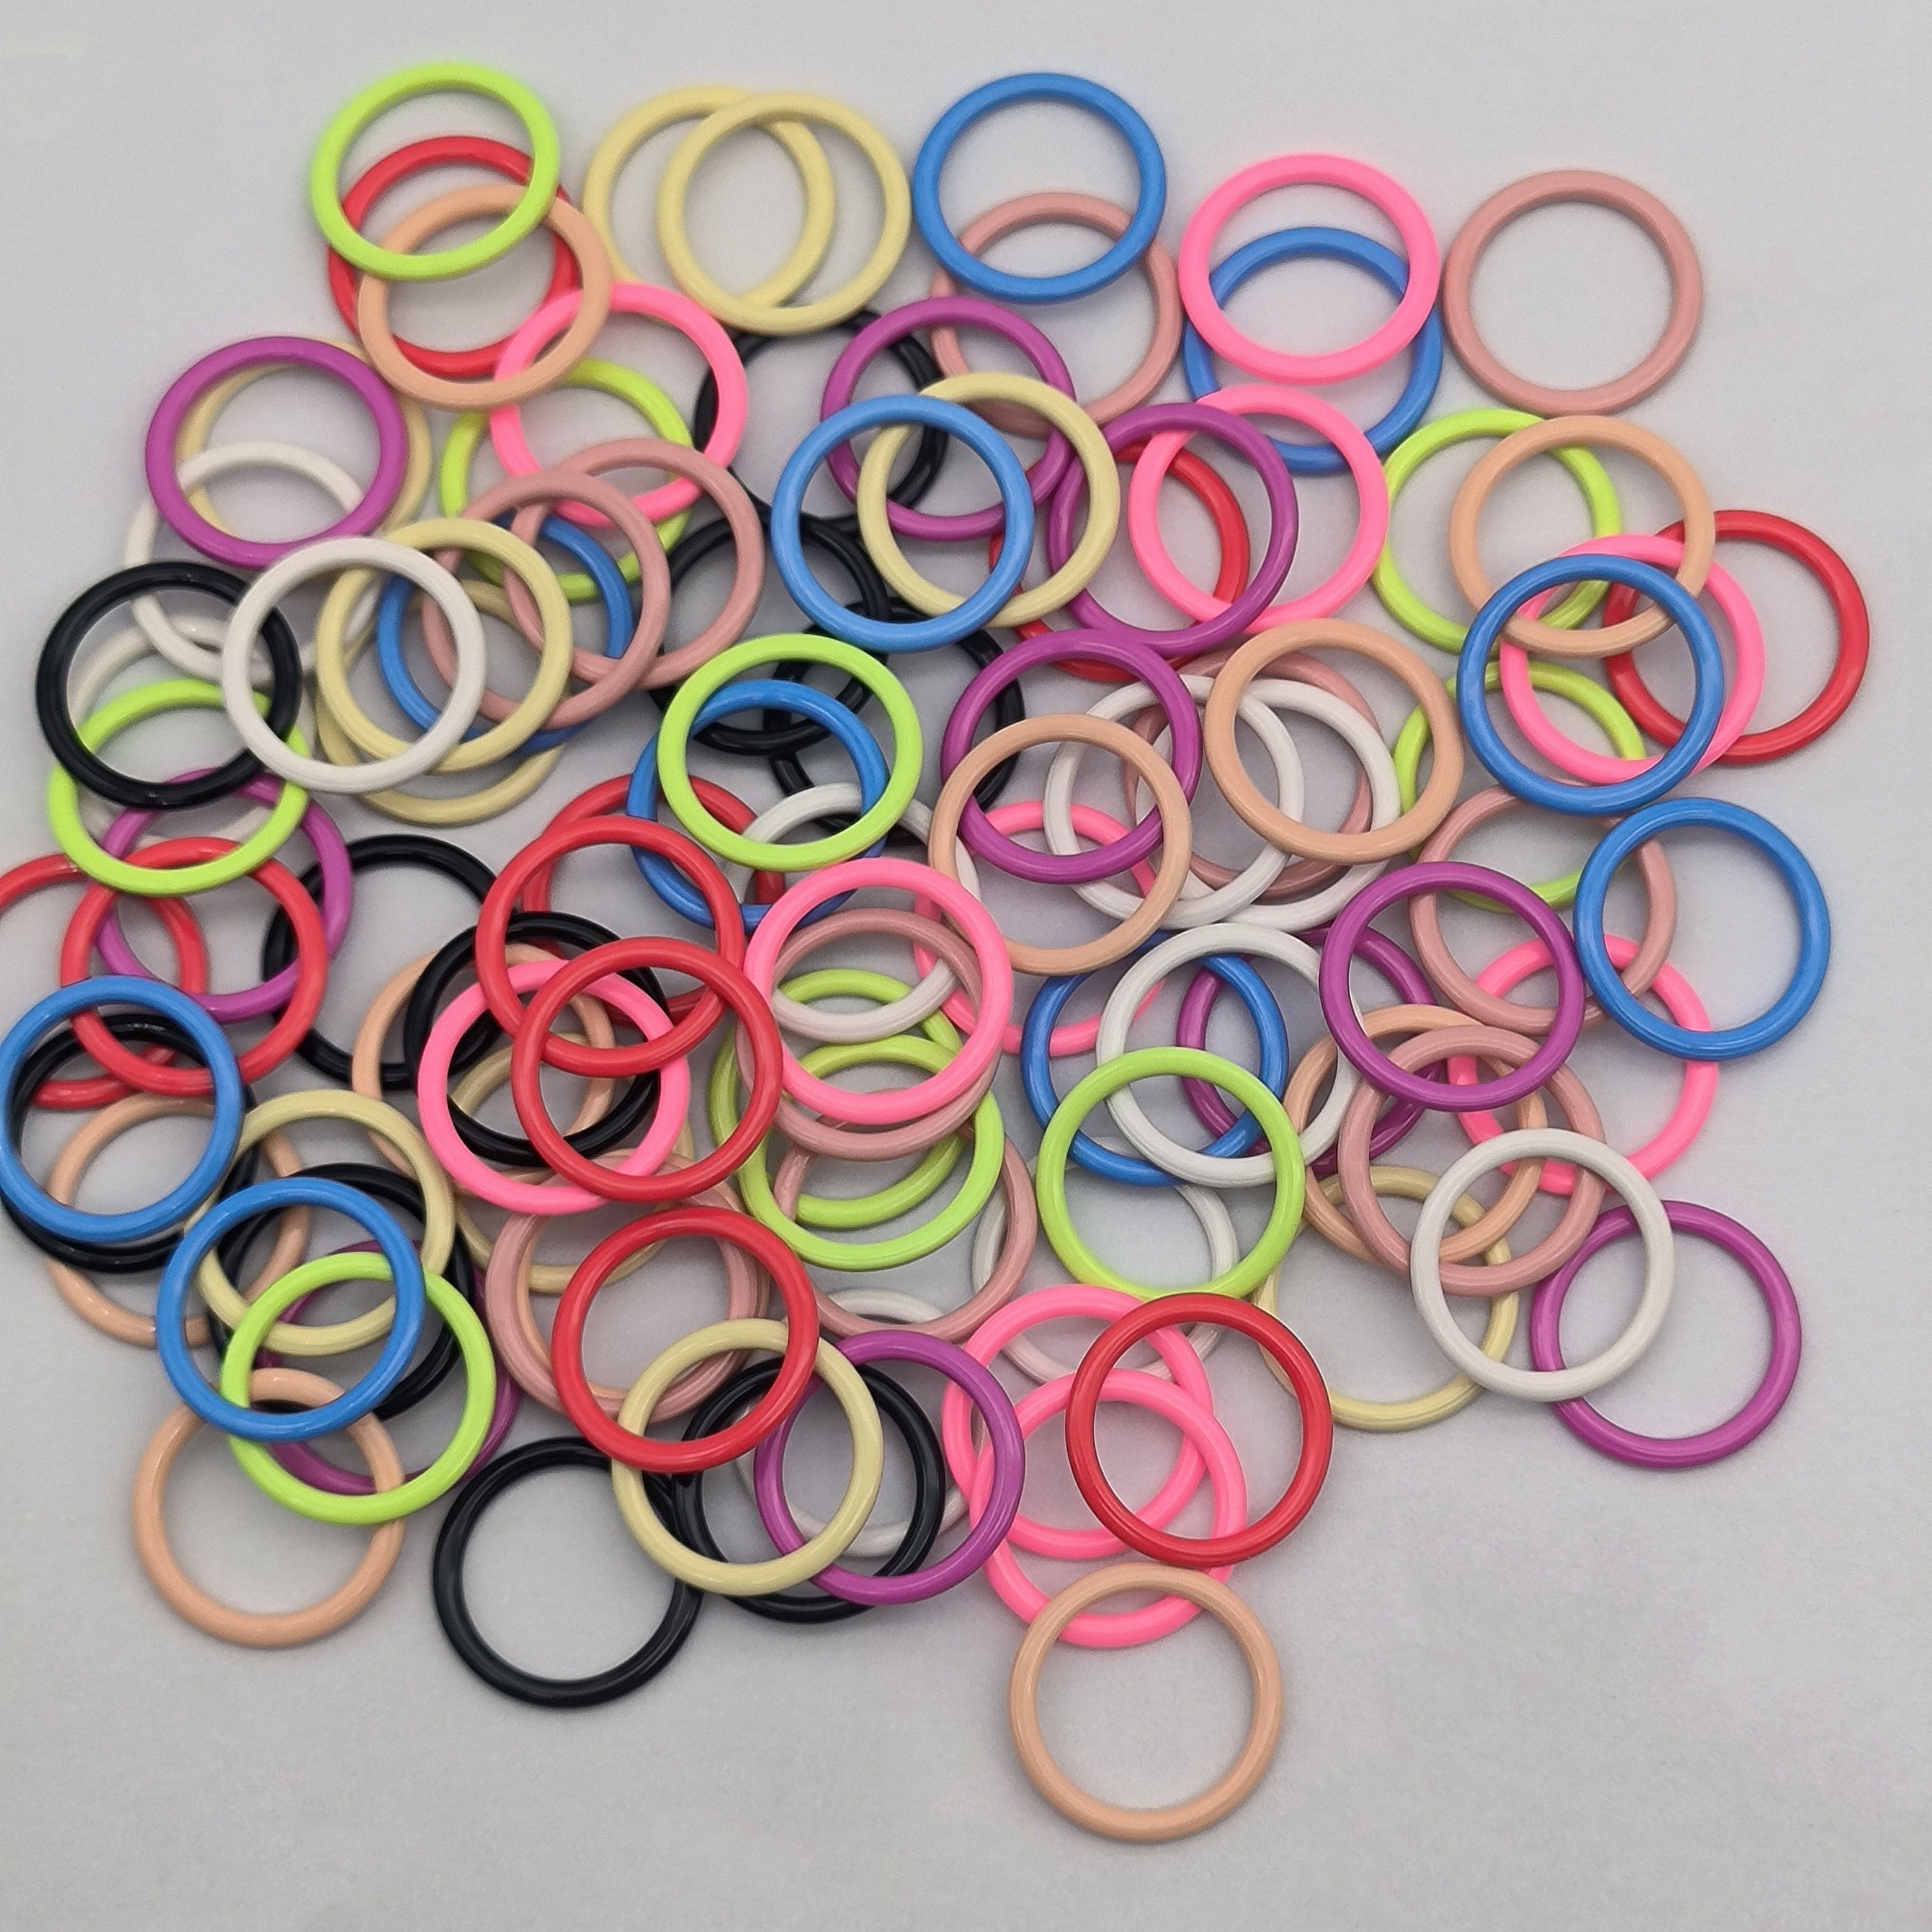 30Pcs Knitting Stitch Rings, Metal Stitch Marker Ring, Colorful Knitting  Markers for Quilting Sewing Craft